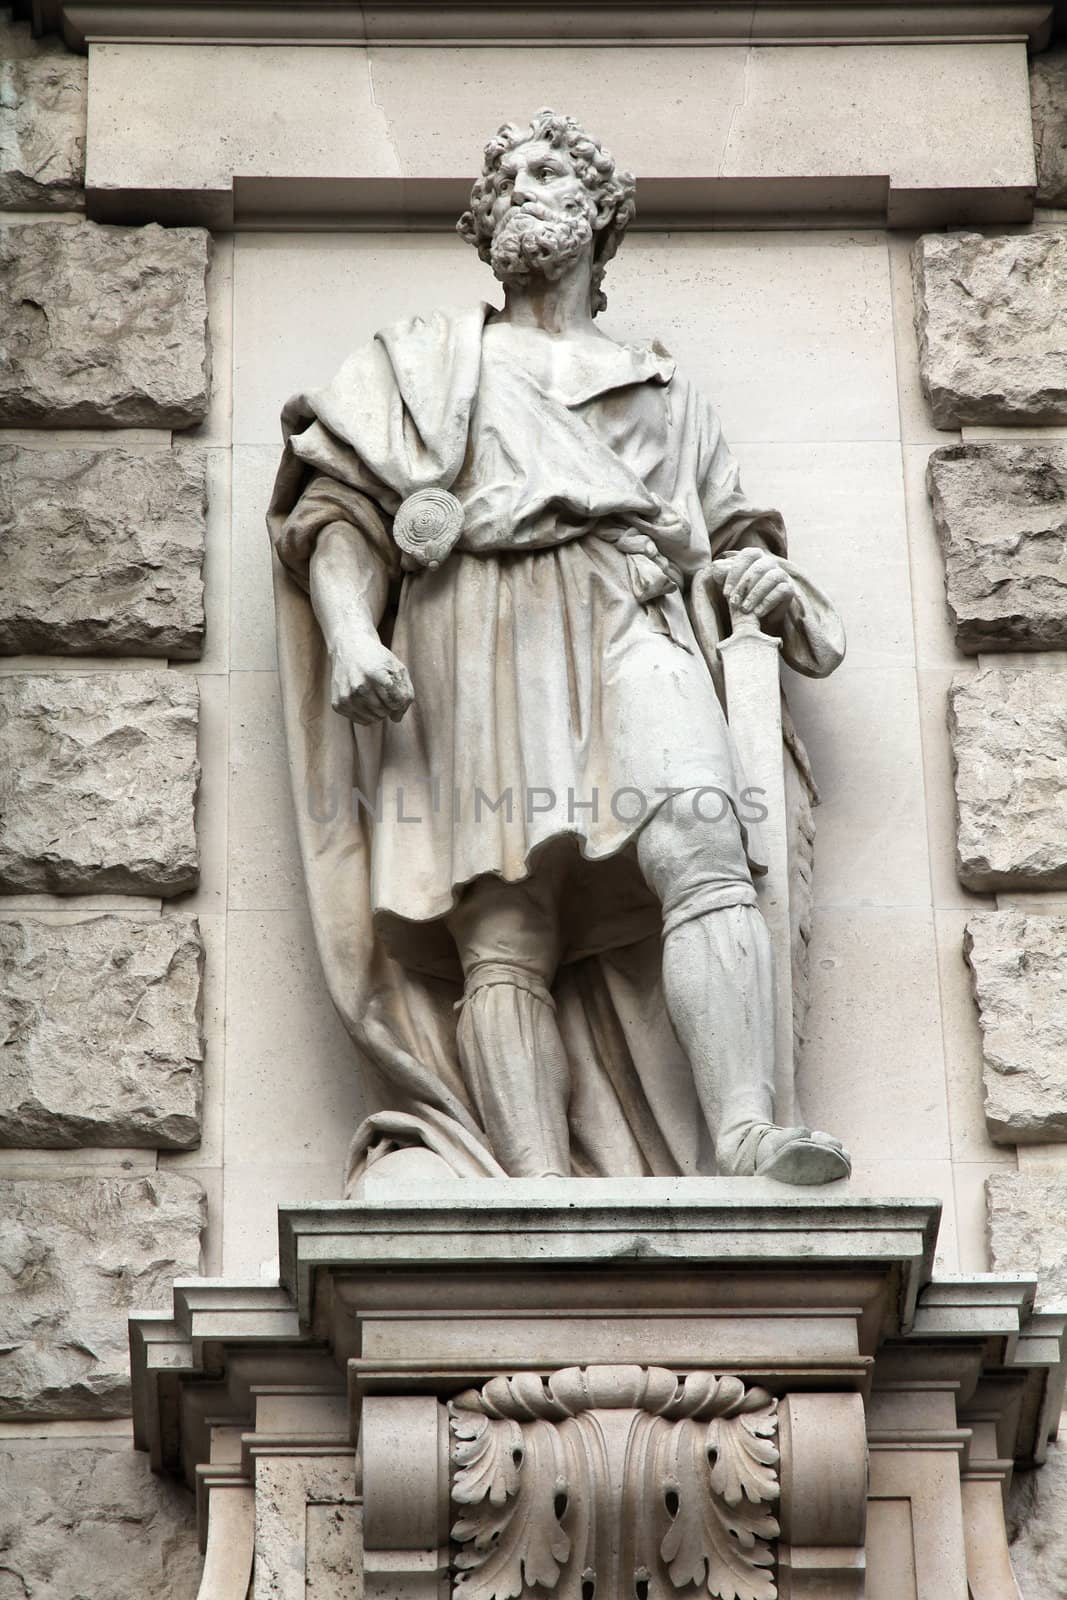 Vienna, Austria - statue in Neue Burg (part of Hofburg palace) facade. Sculpture depicts Marcomanni Germanic tribe. The Old Town is a UNESCO World Heritage Site.